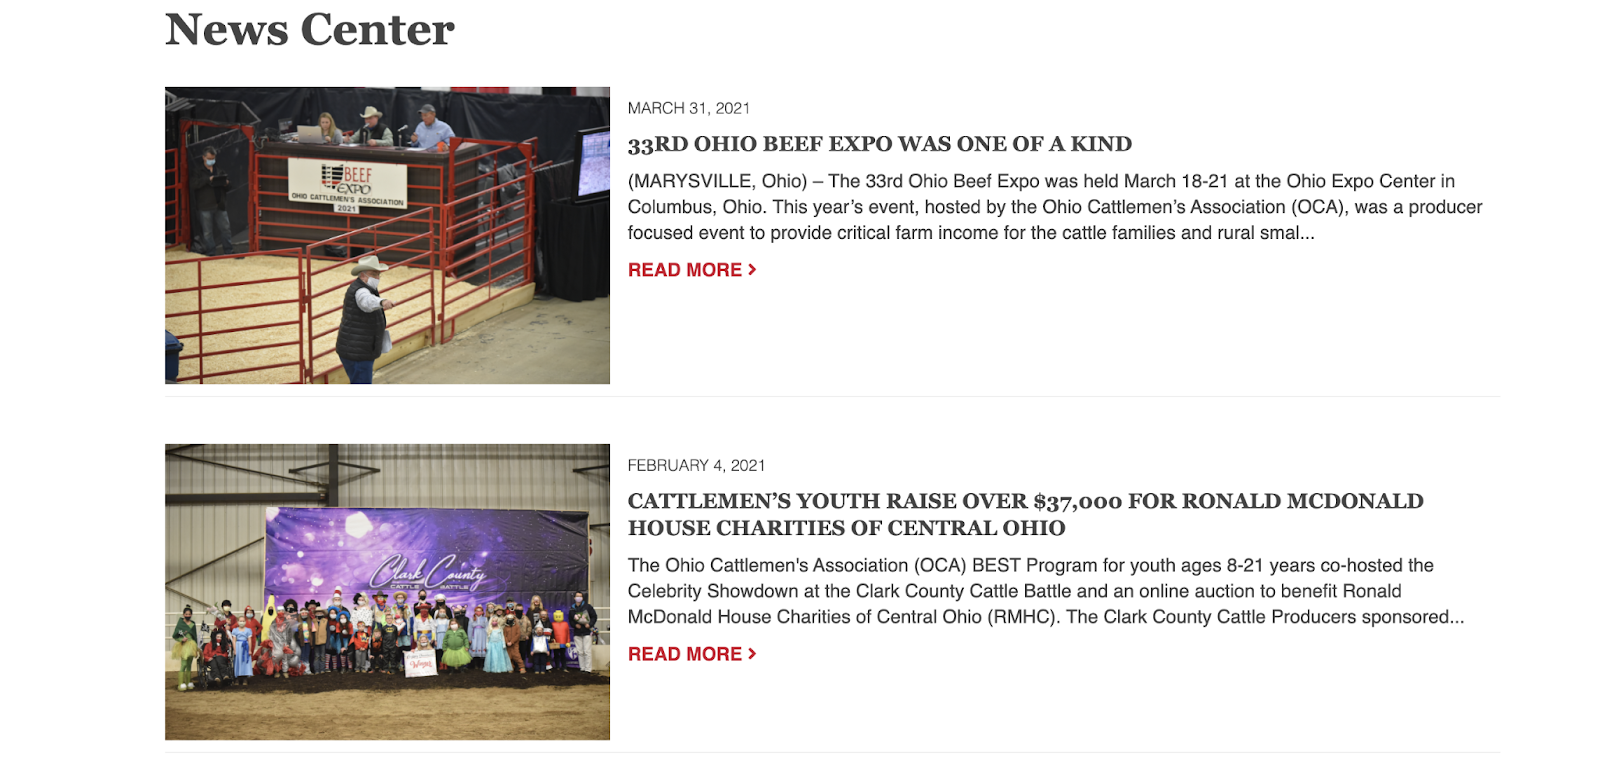 Ohio Cattlemen’s Association news section that includes a featured image and a snippet of the news articles, along with catchy titles and a read more button.